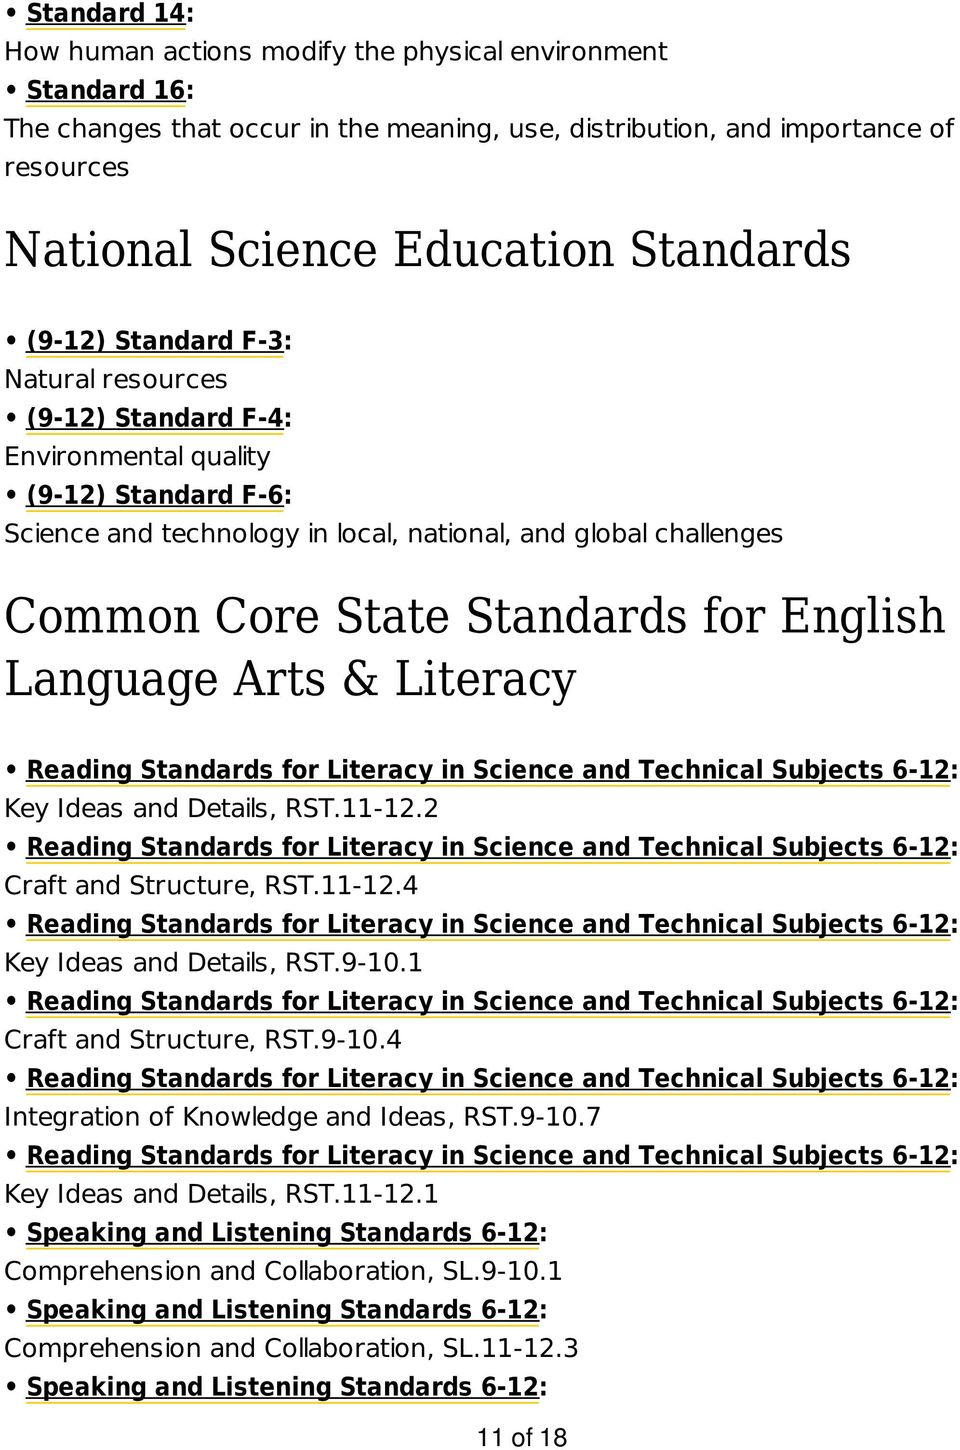 English Language Arts & Literacy Reading Standards for Literacy in Science and Technical Subjects 6-12: Key Ideas and Details, RST.11-12.